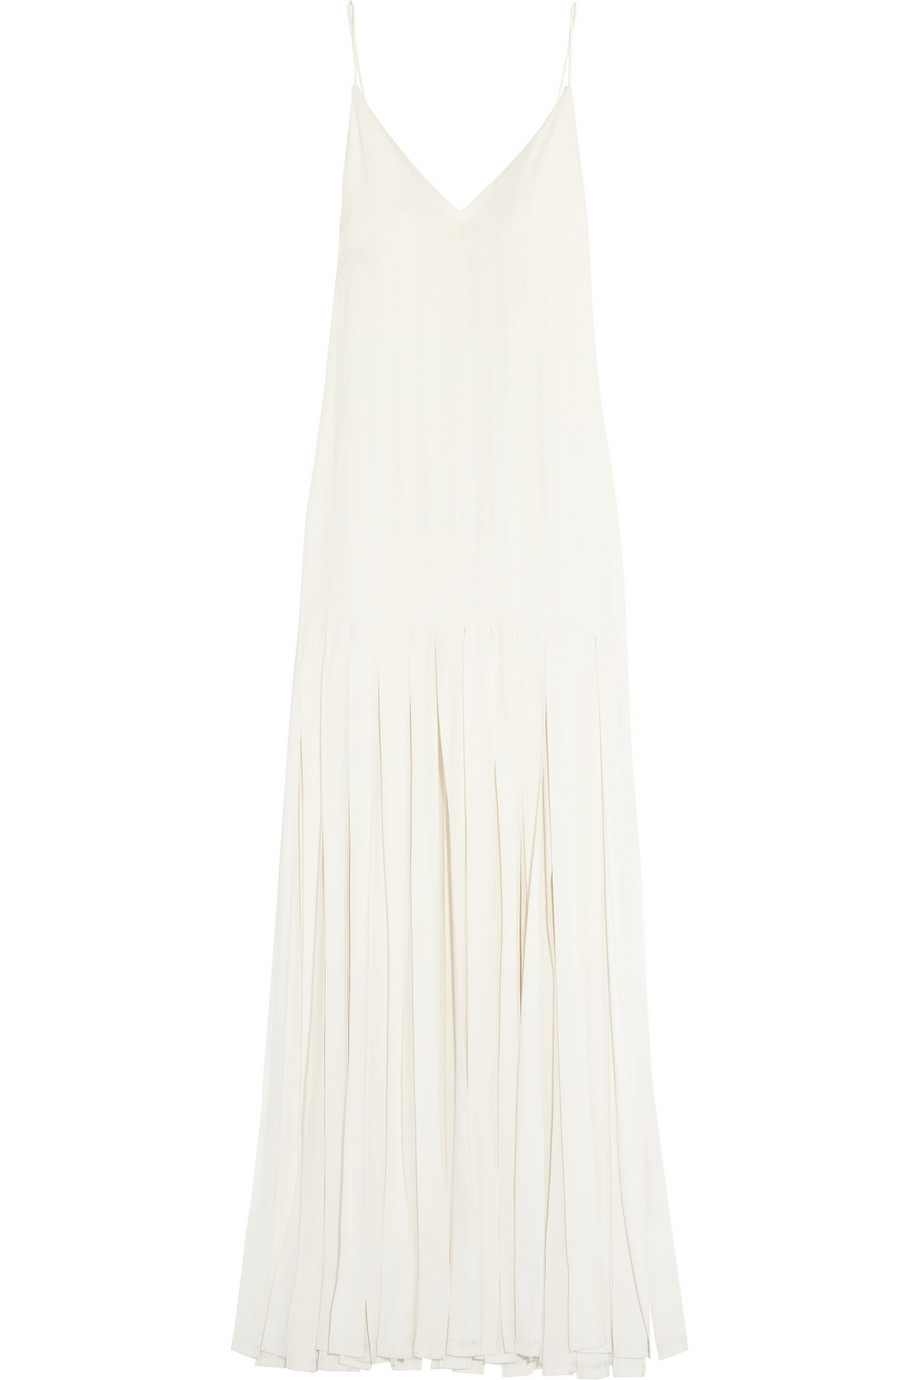 TOPSHOP Fringed Stretchcrepe Maxi Dress in White - Lyst